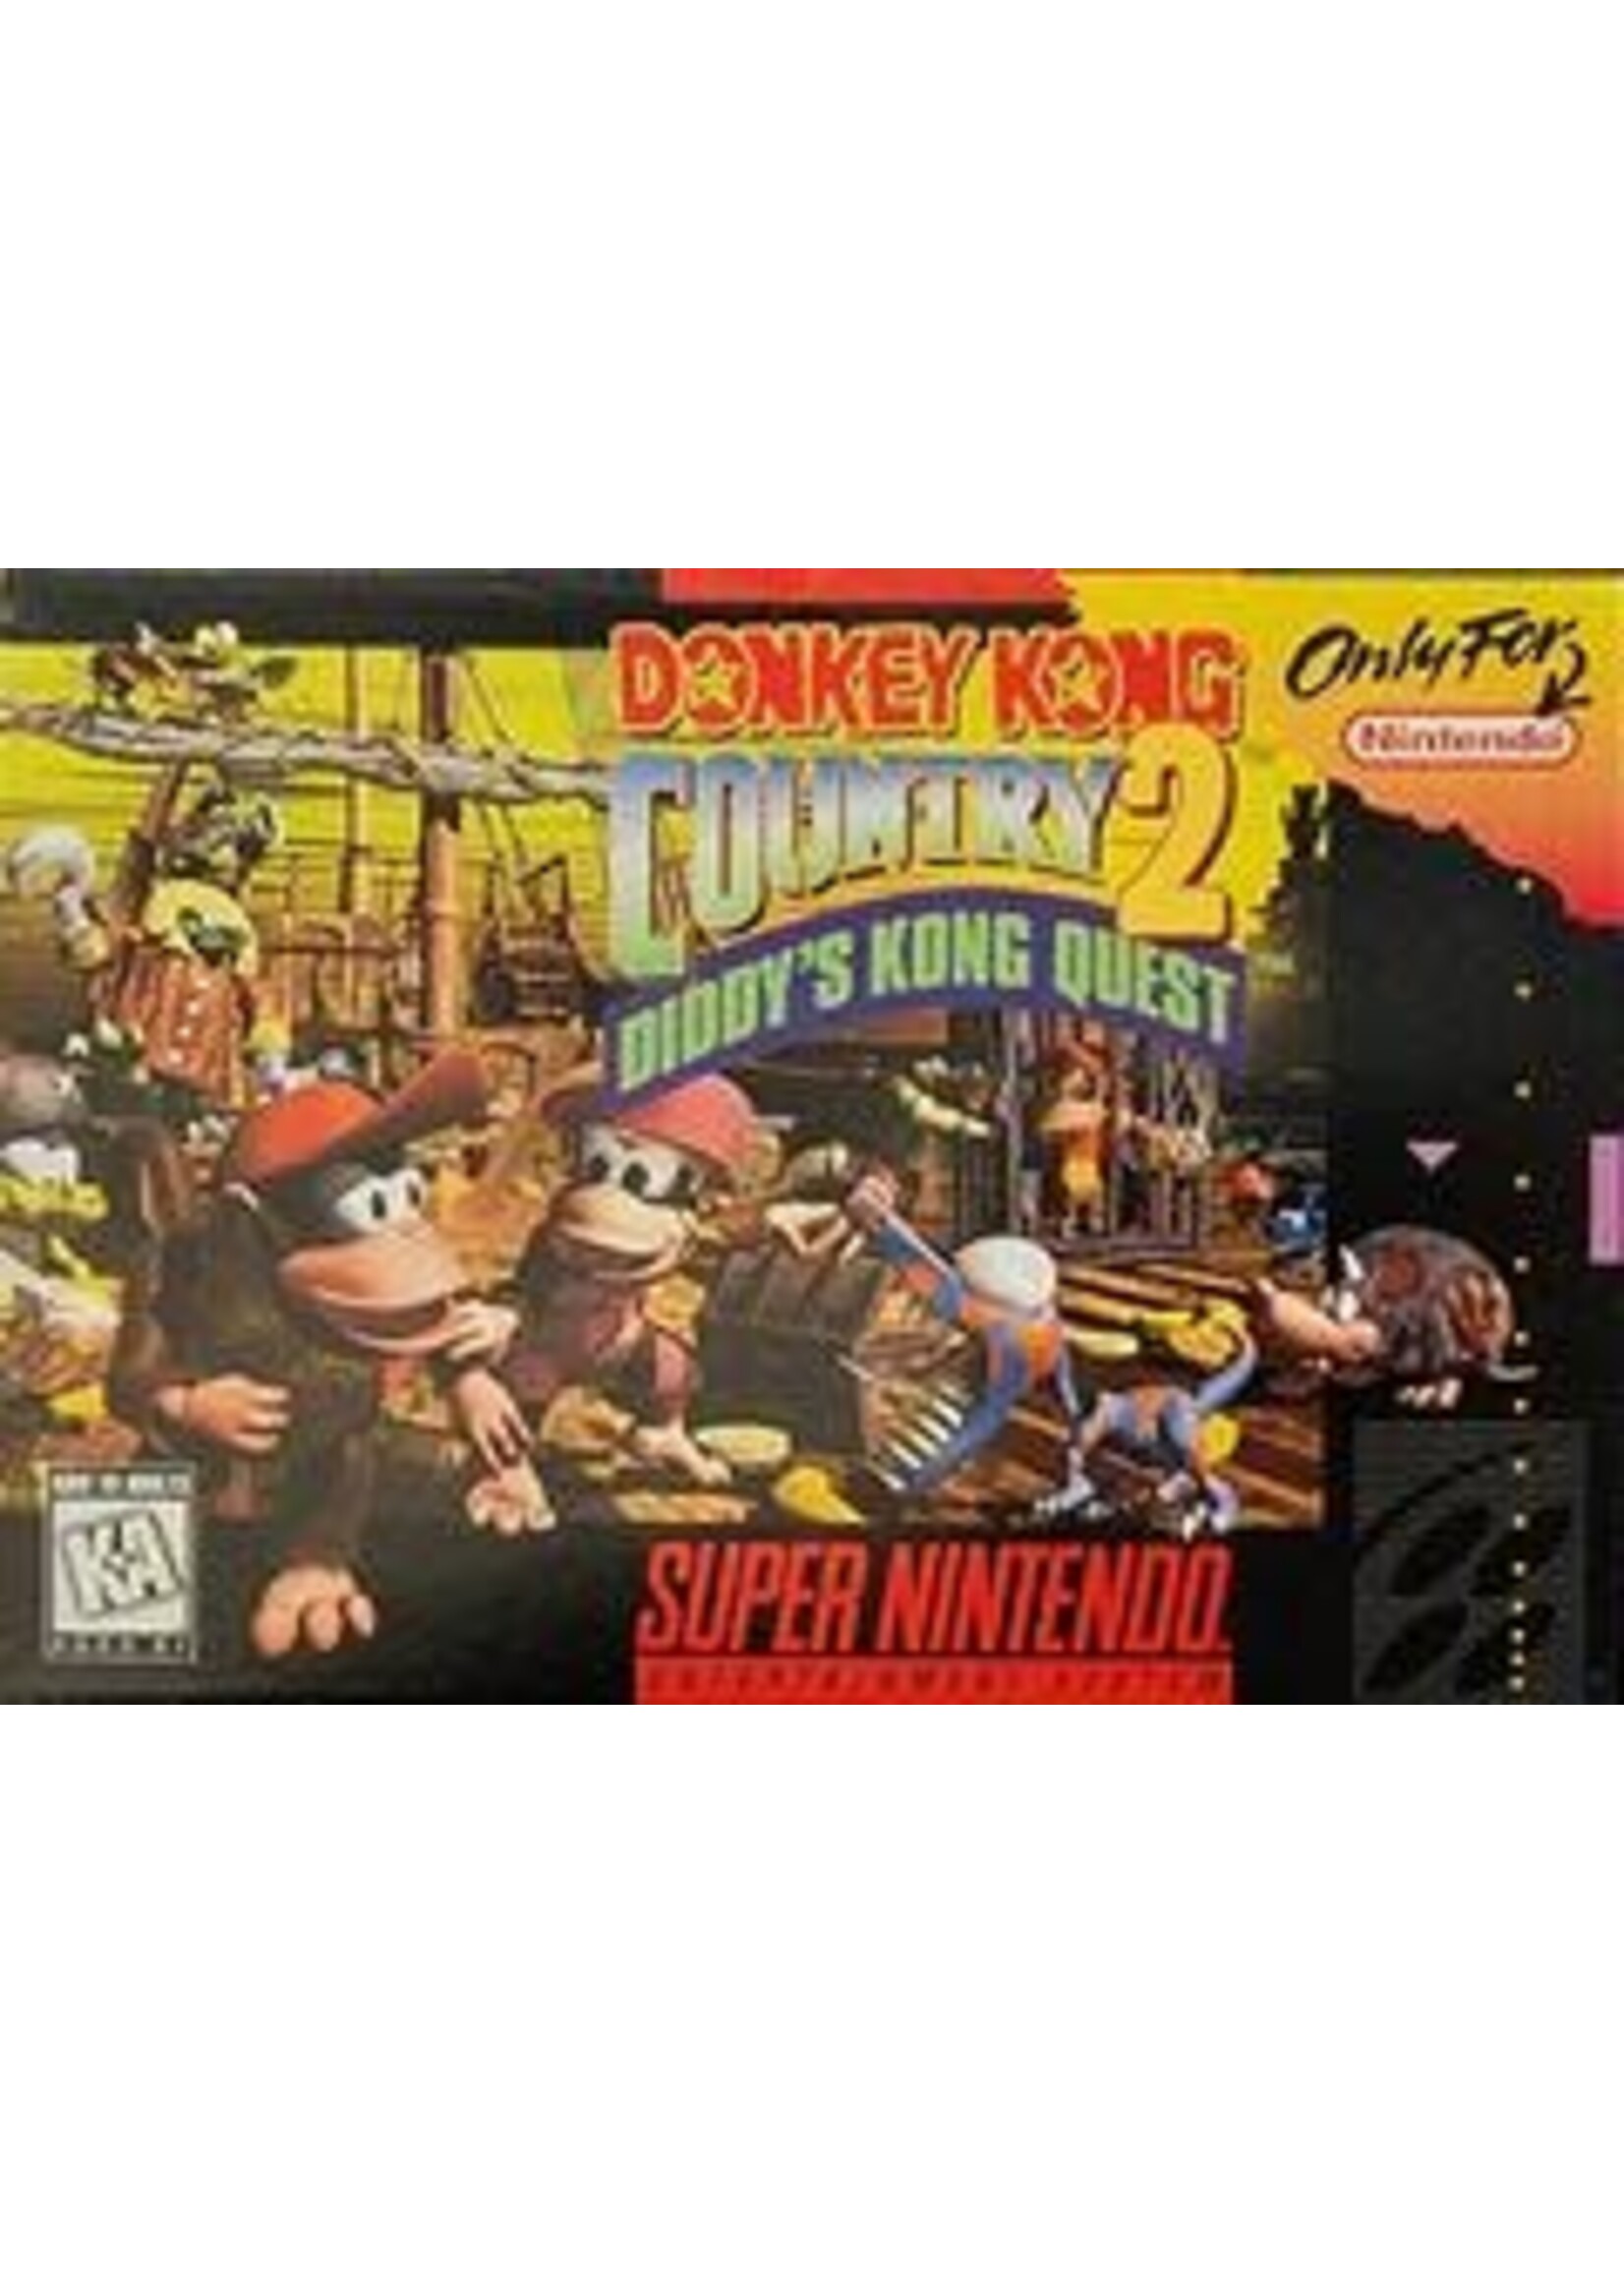 Donkey Kong Country 2 Super Nintendo COMPLET IN BOX